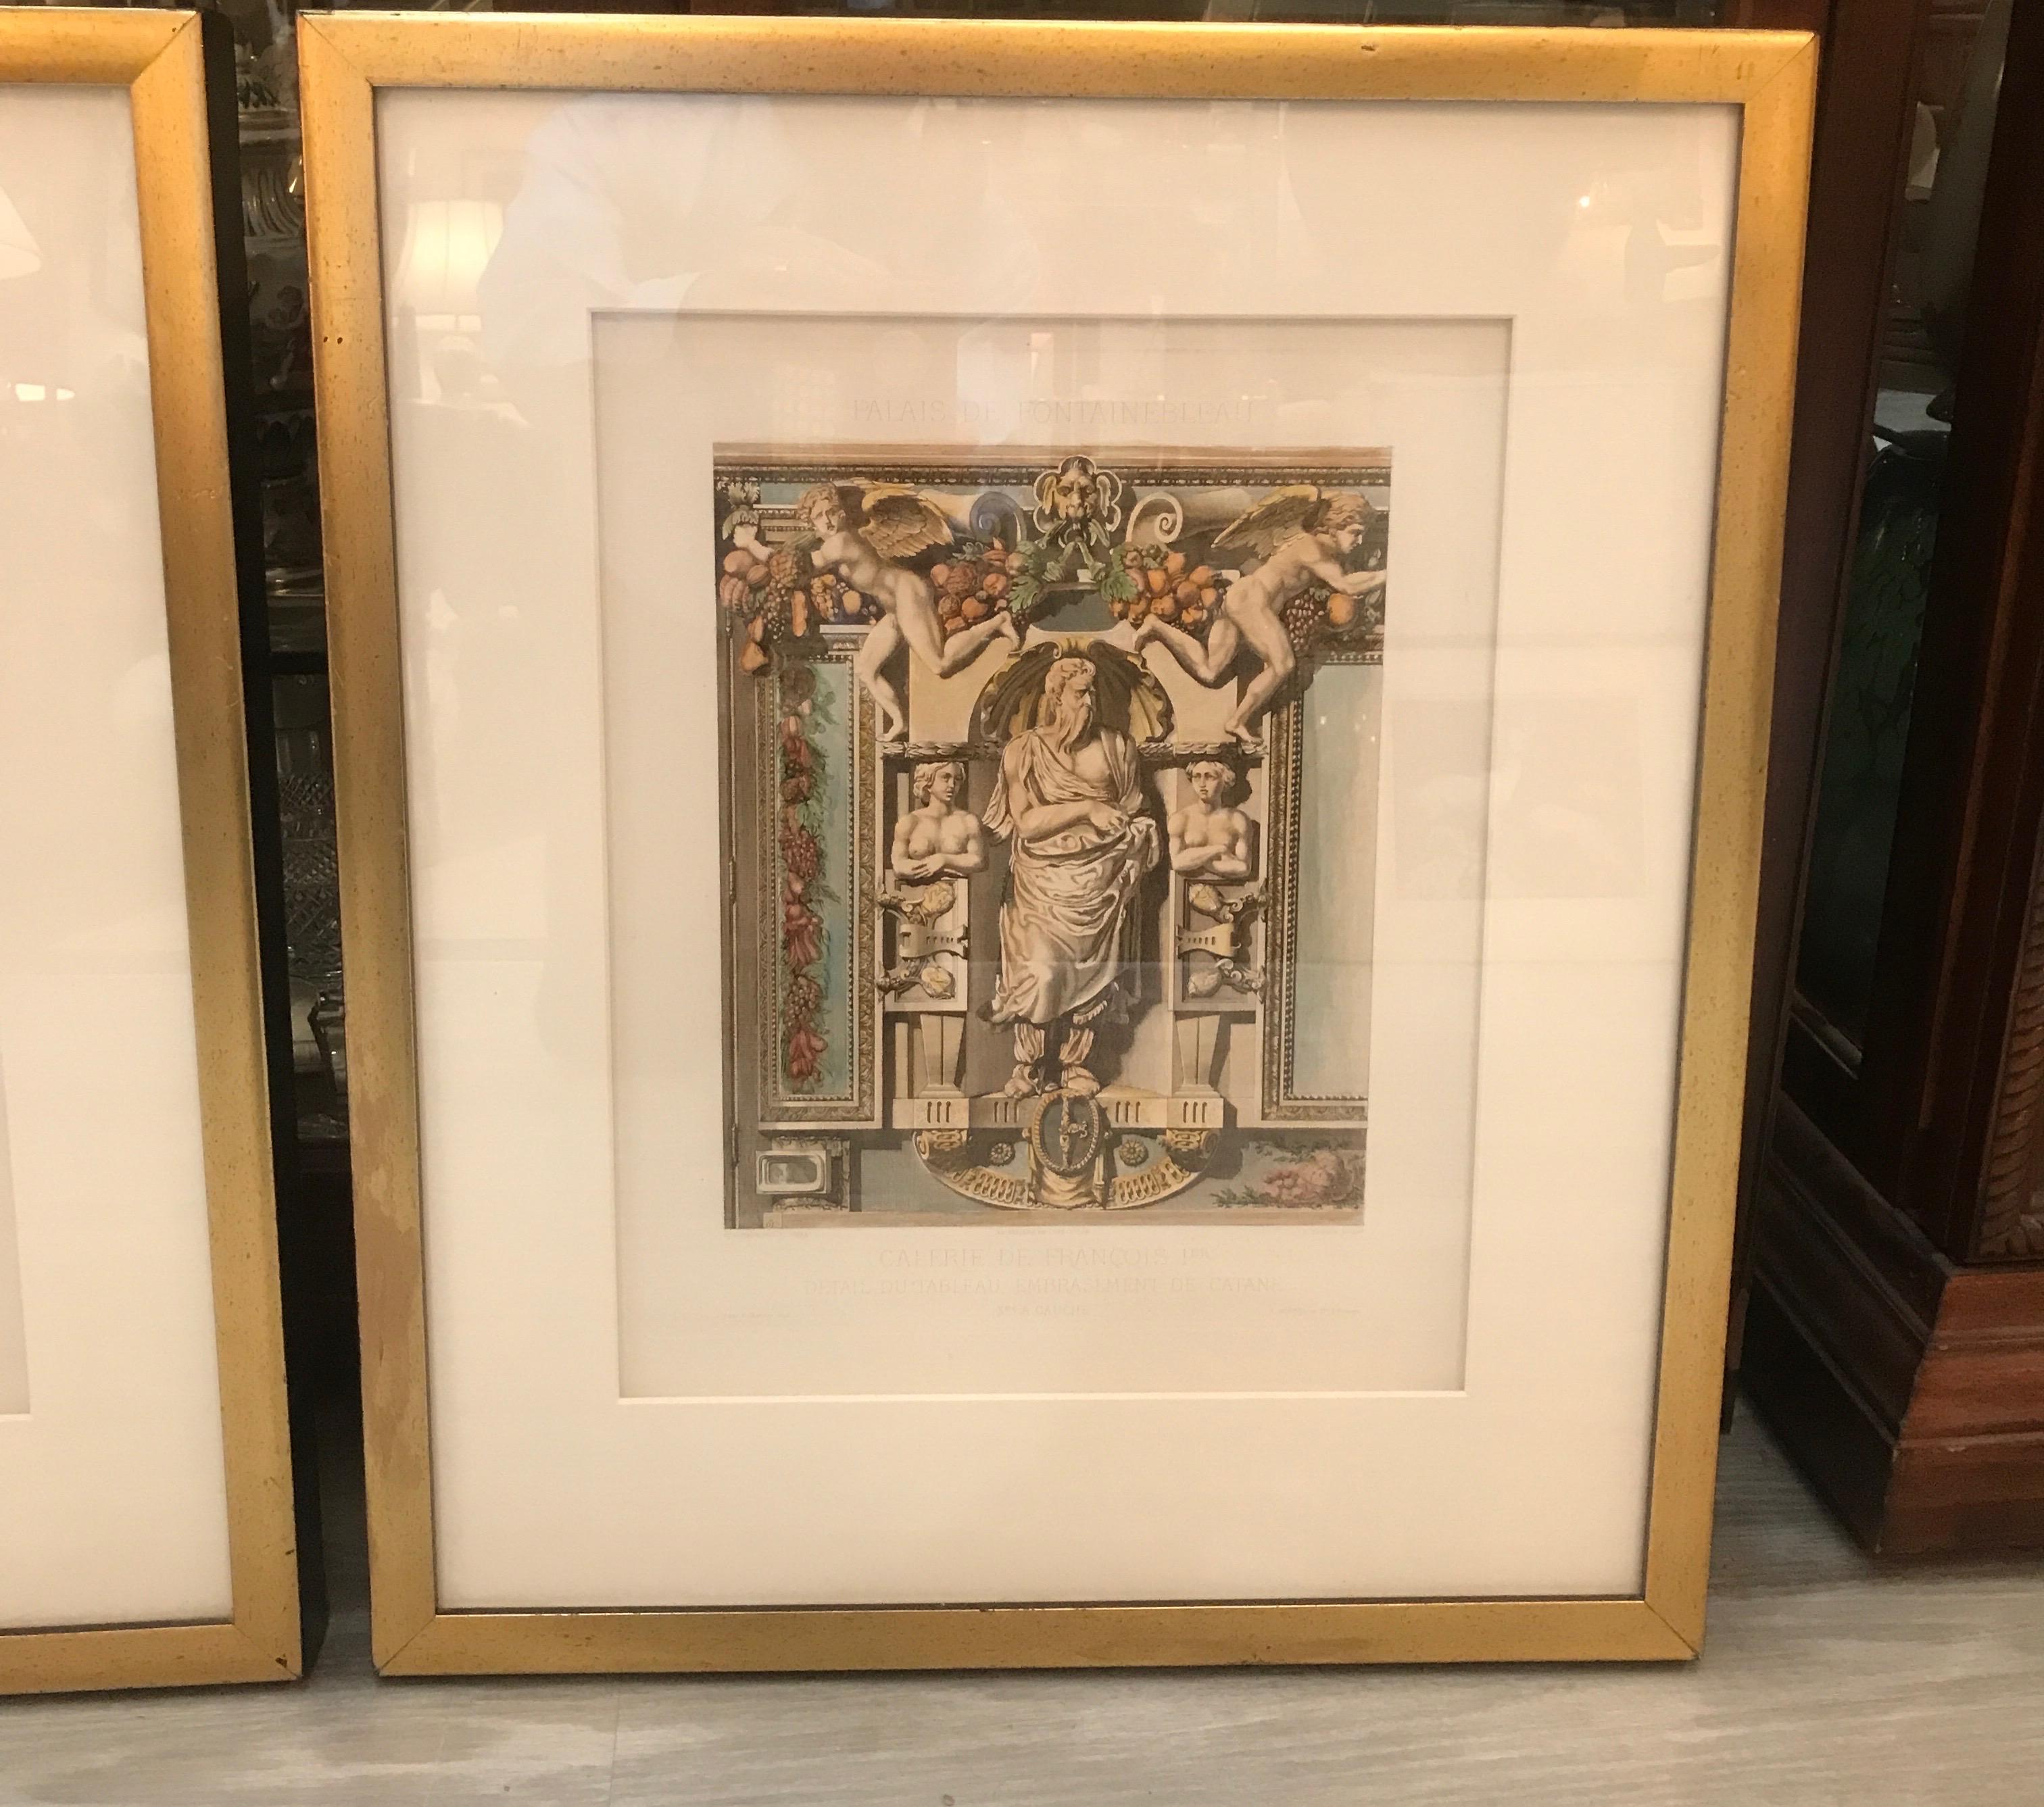 A pair of hand colored copper engraved prints of elaborate partial interior panels from the Palace of Fontainebleau. These soft colored panels from the mid-19th century with later simple giltwood frames. The prints retaining their original color